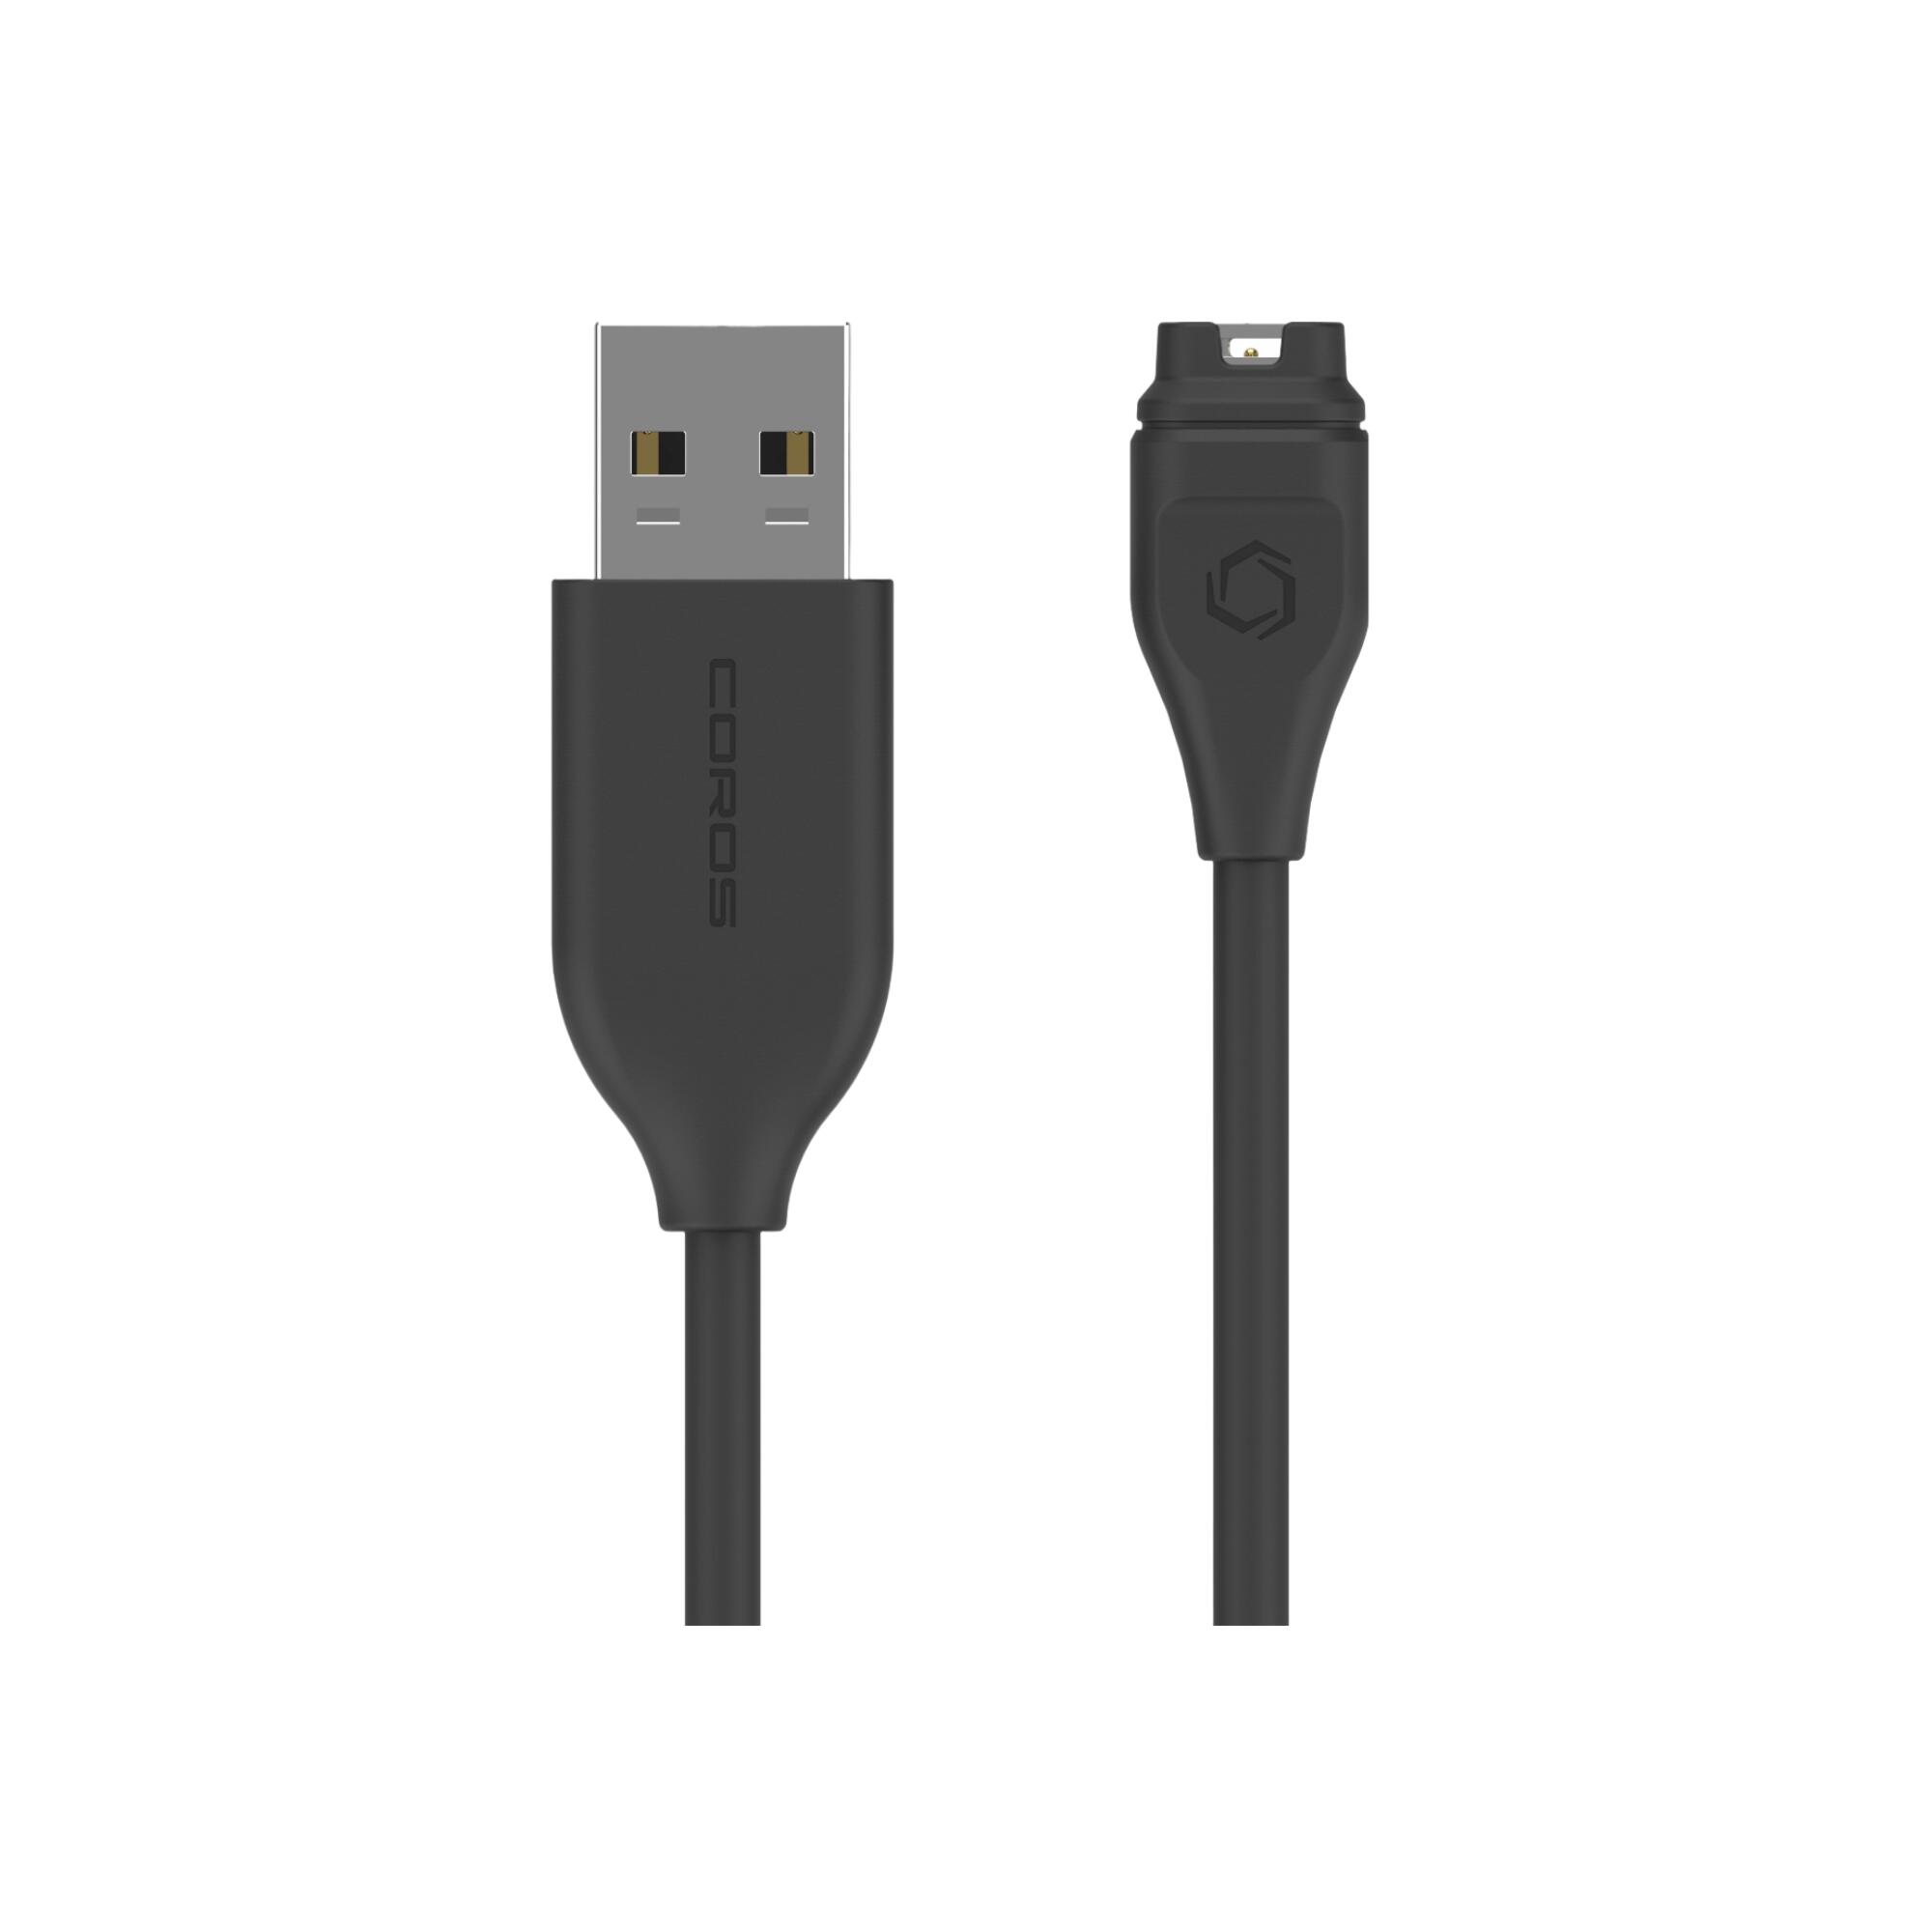 Cable charger Coros - GPS 900 by Coros / PACE 2/APEX 1, 2, PRO 2 / VERTIX 1 & 2 1/1